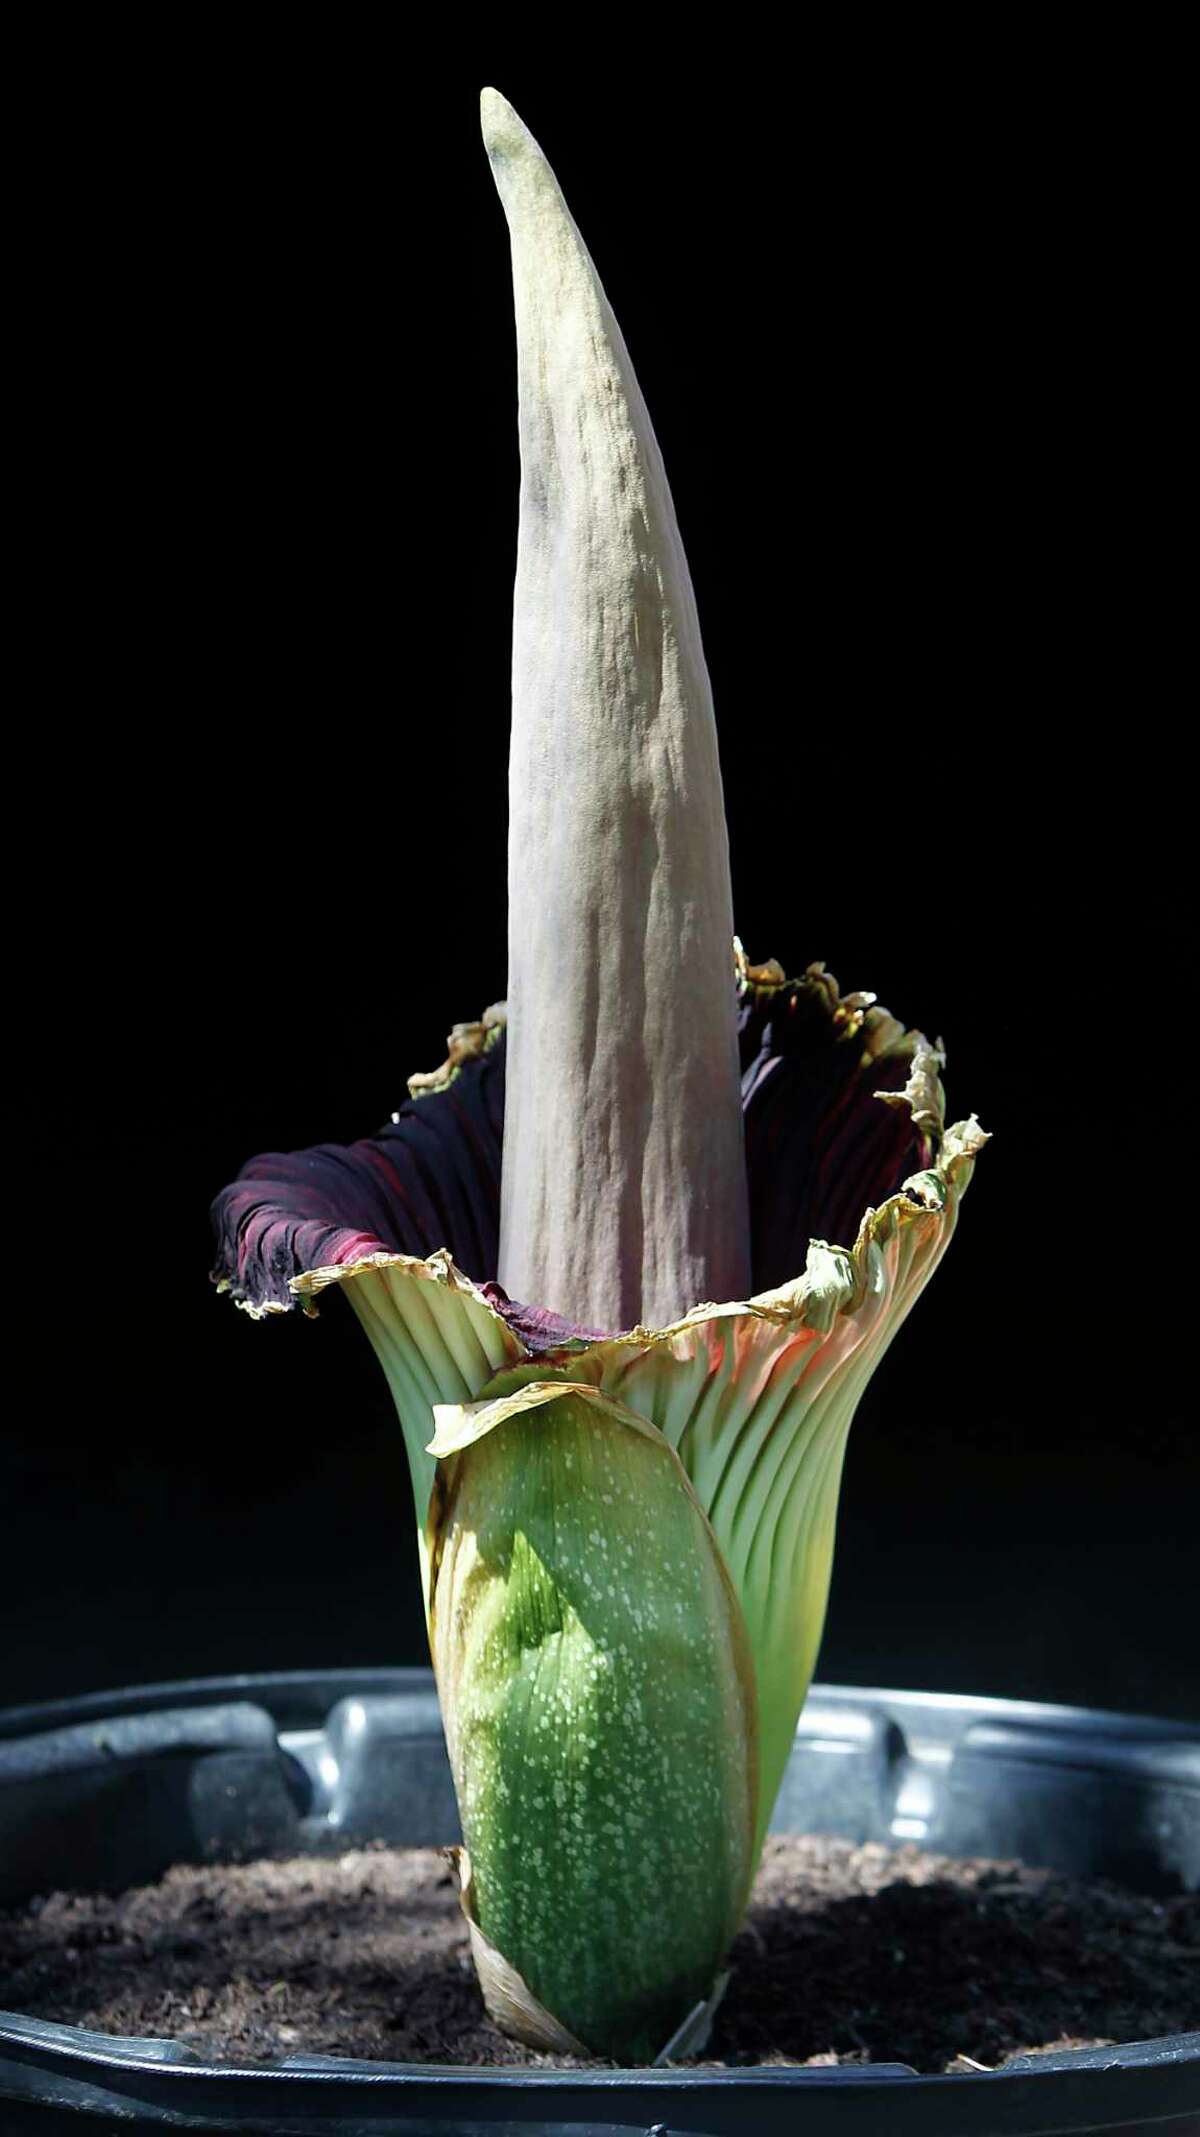 Pewtunia is a 7-year-old corpse flower that flowered at the Houston Zoo in 2011. In its native habitat, the flower can stand 10 feet tall and measure up to 5 feet across, one of the world's largest blooms.